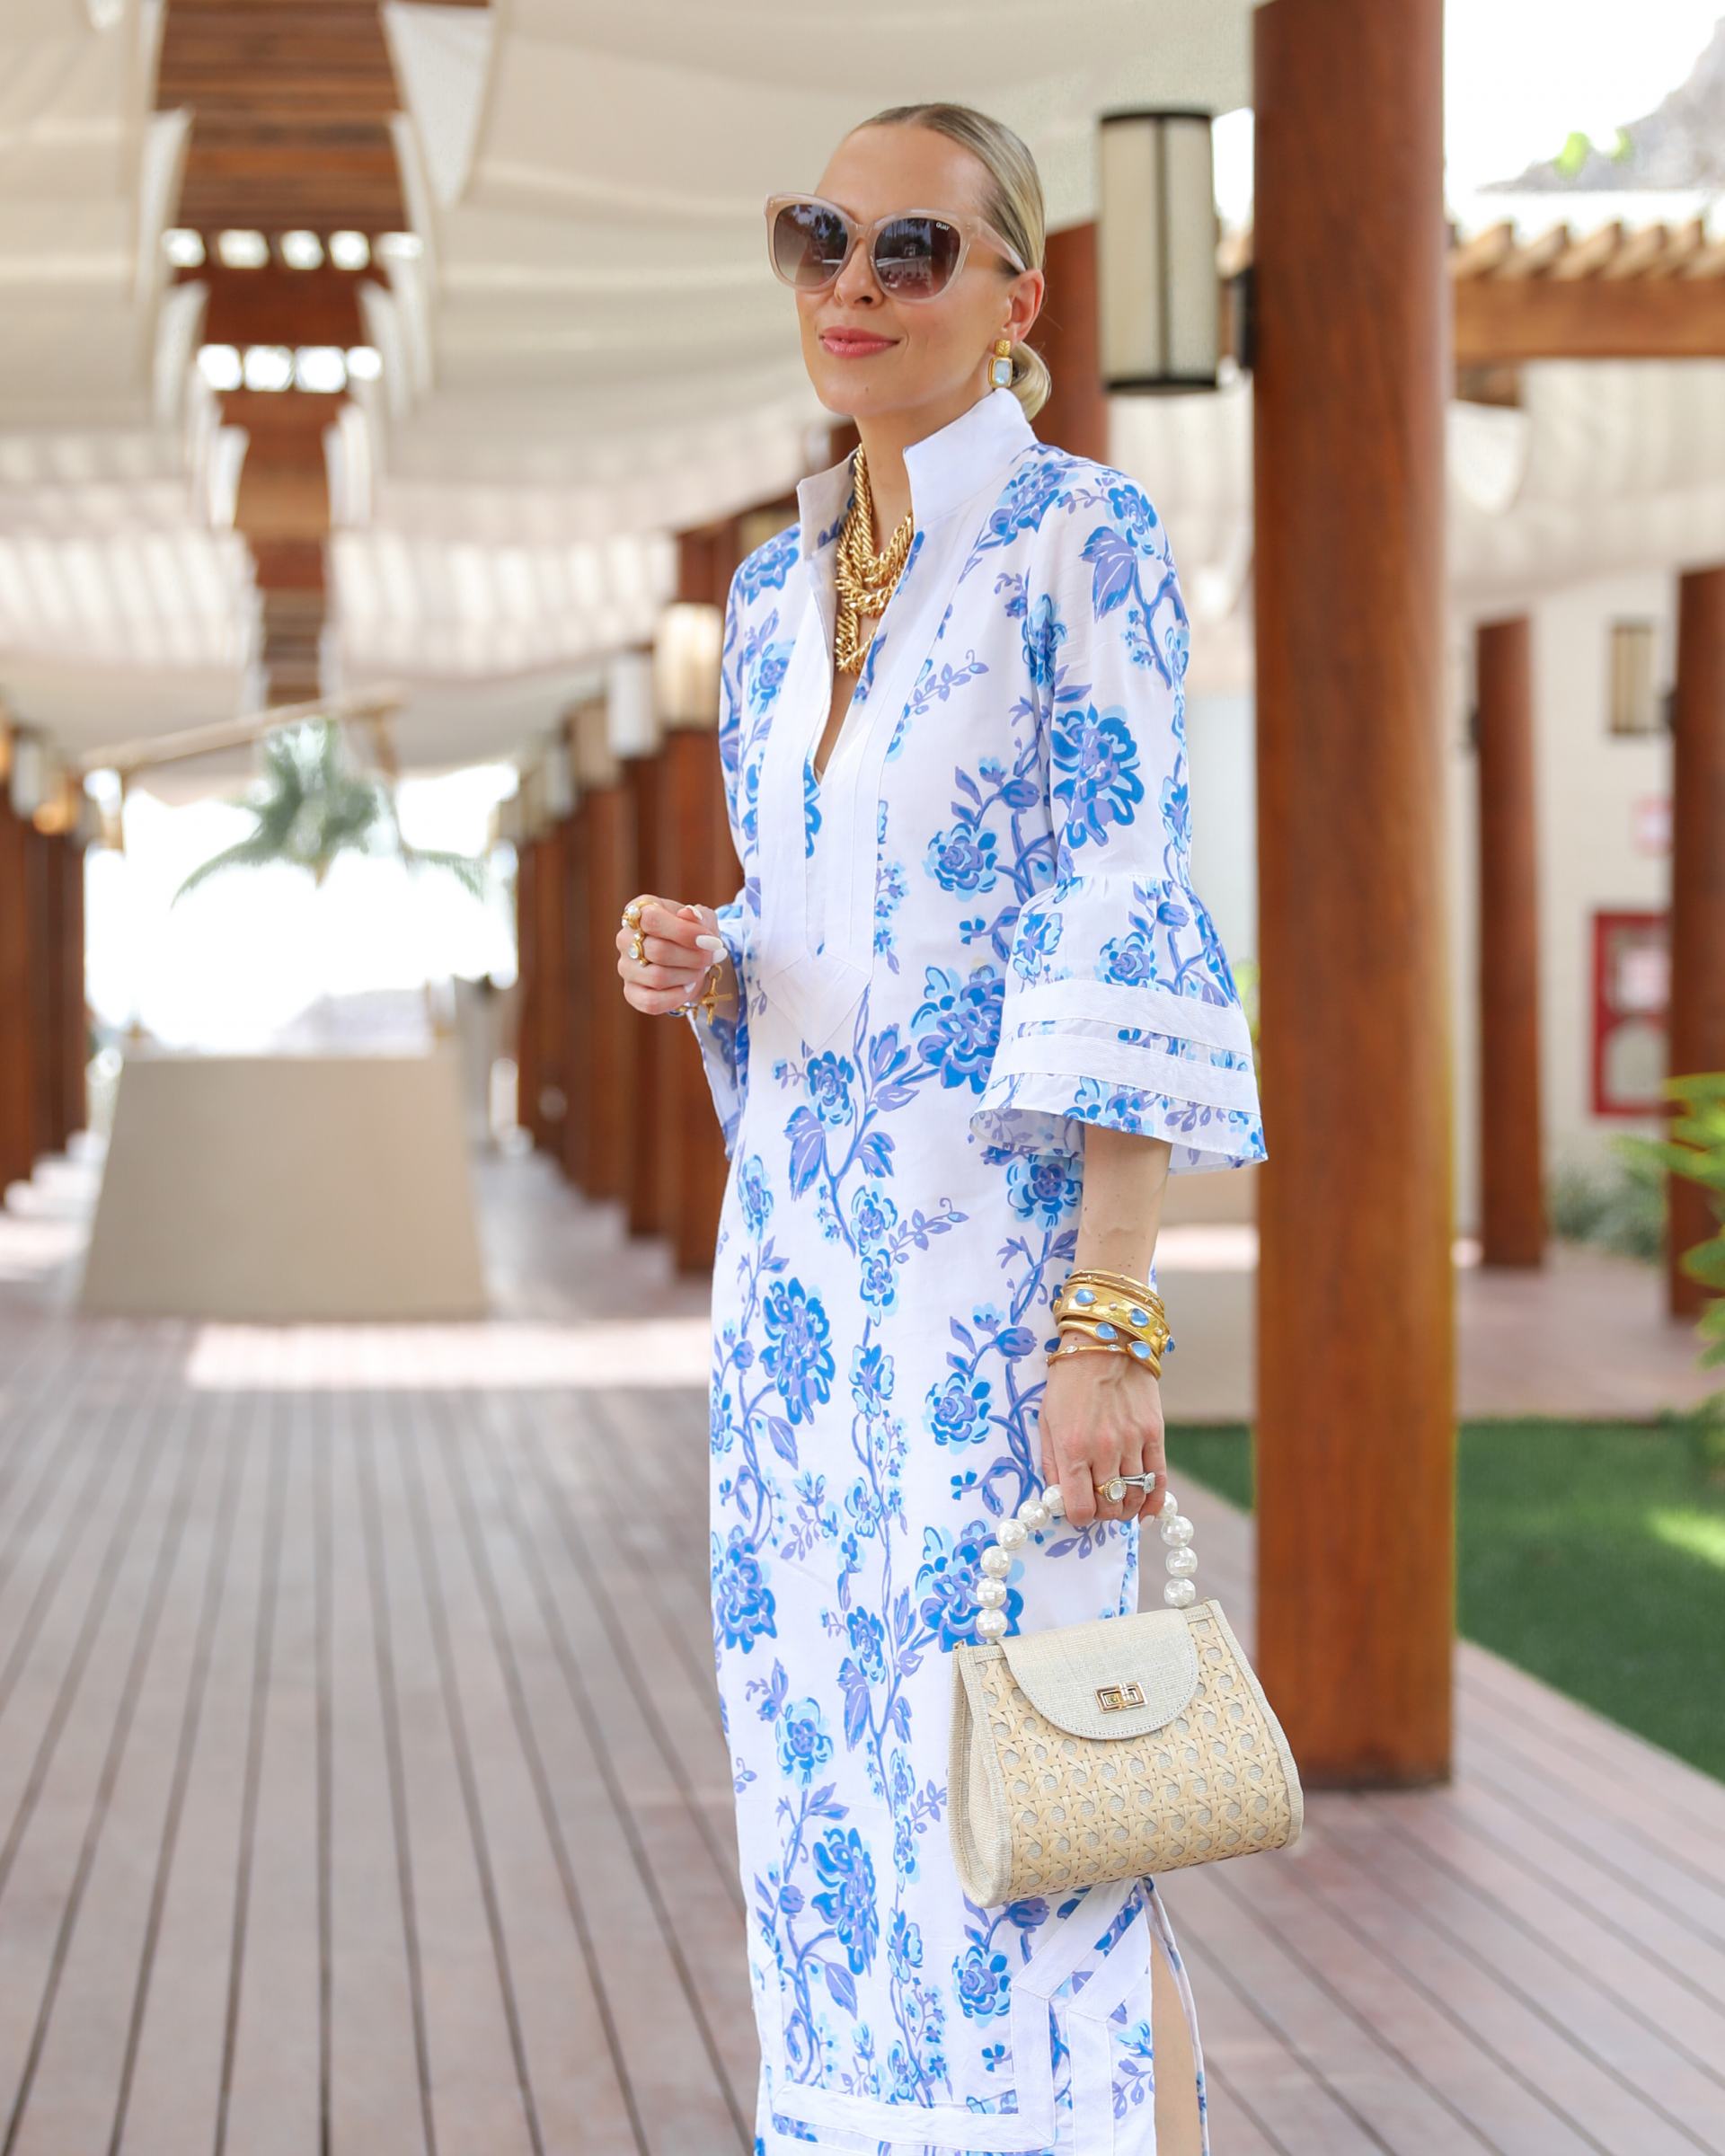 Jennifer Lake x Sail to Sable collaboration launch on 4/25. Blue Kit Kaftan dress styled for resort travel summer inspiration by Veronica Levy, Lombard & Fifth.